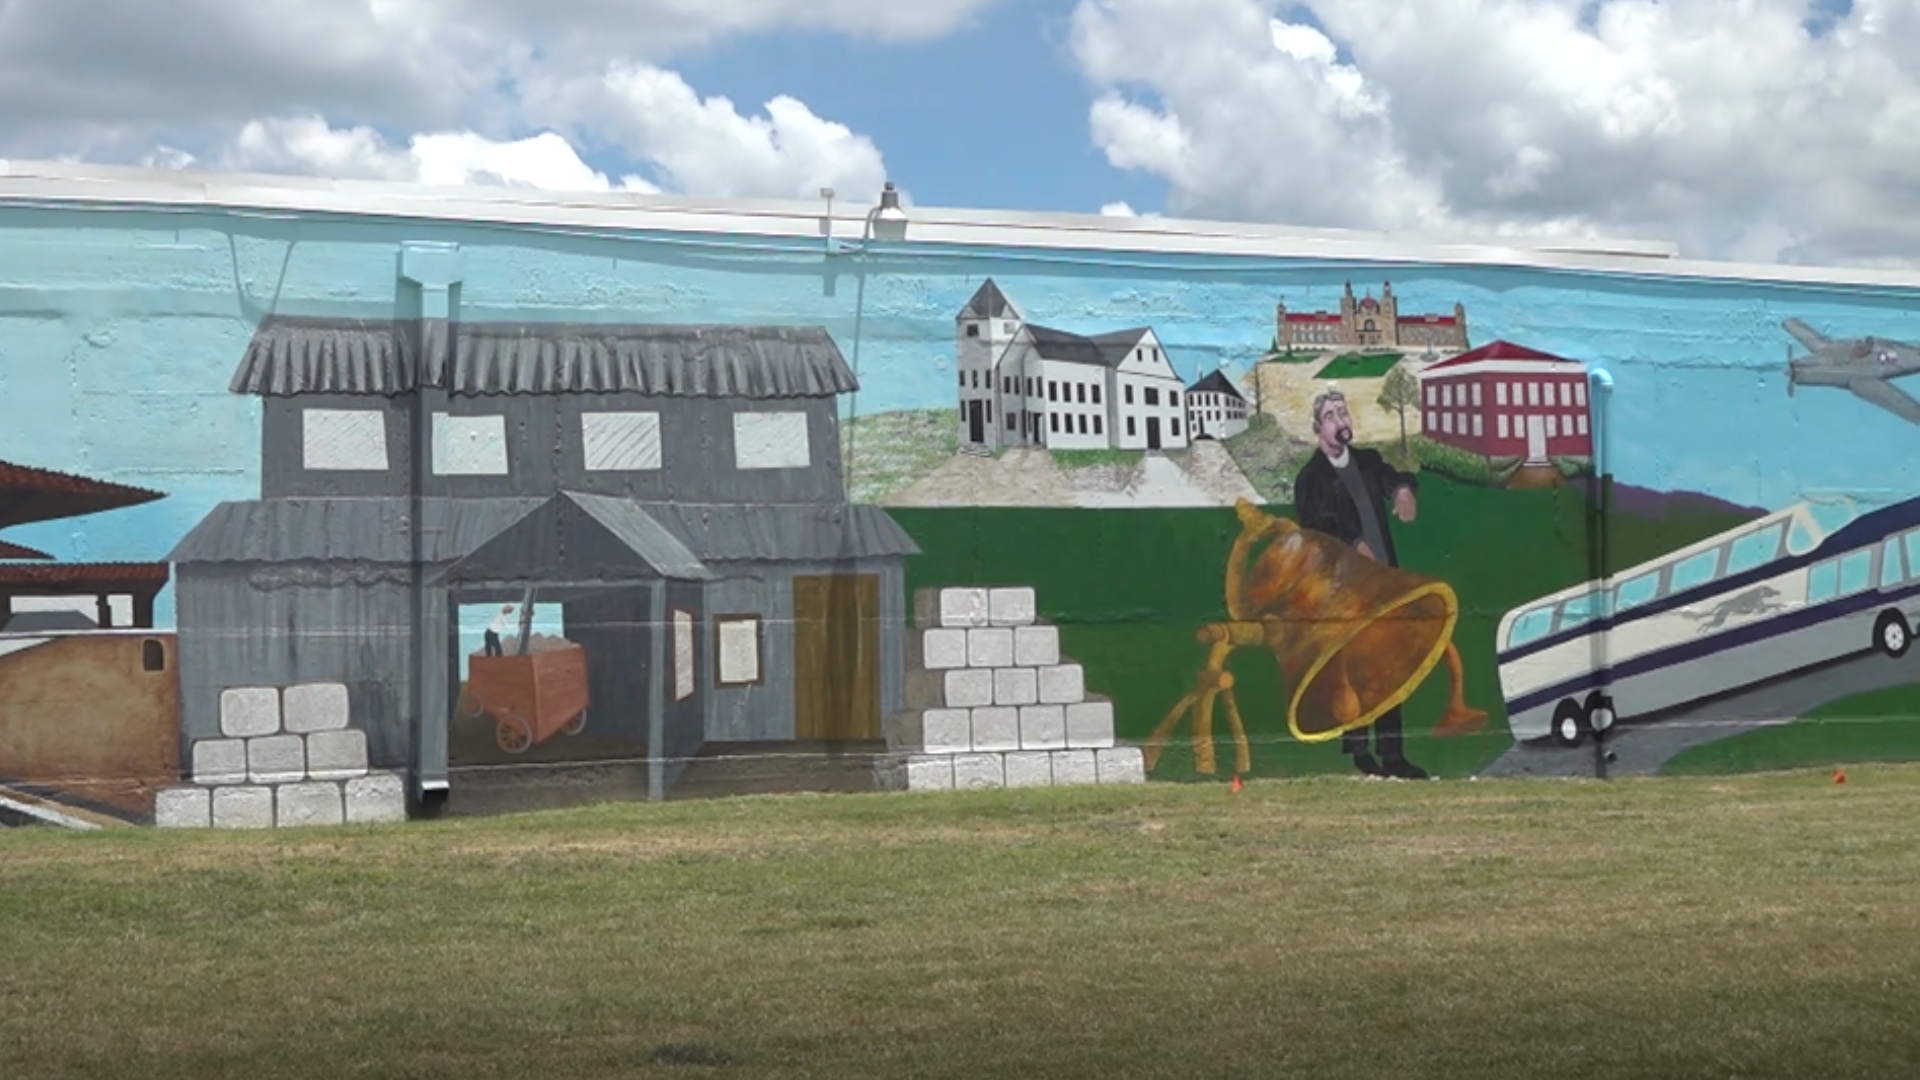 After eight weeks of hard work and creativity, Waco's largest mural is finally complete.